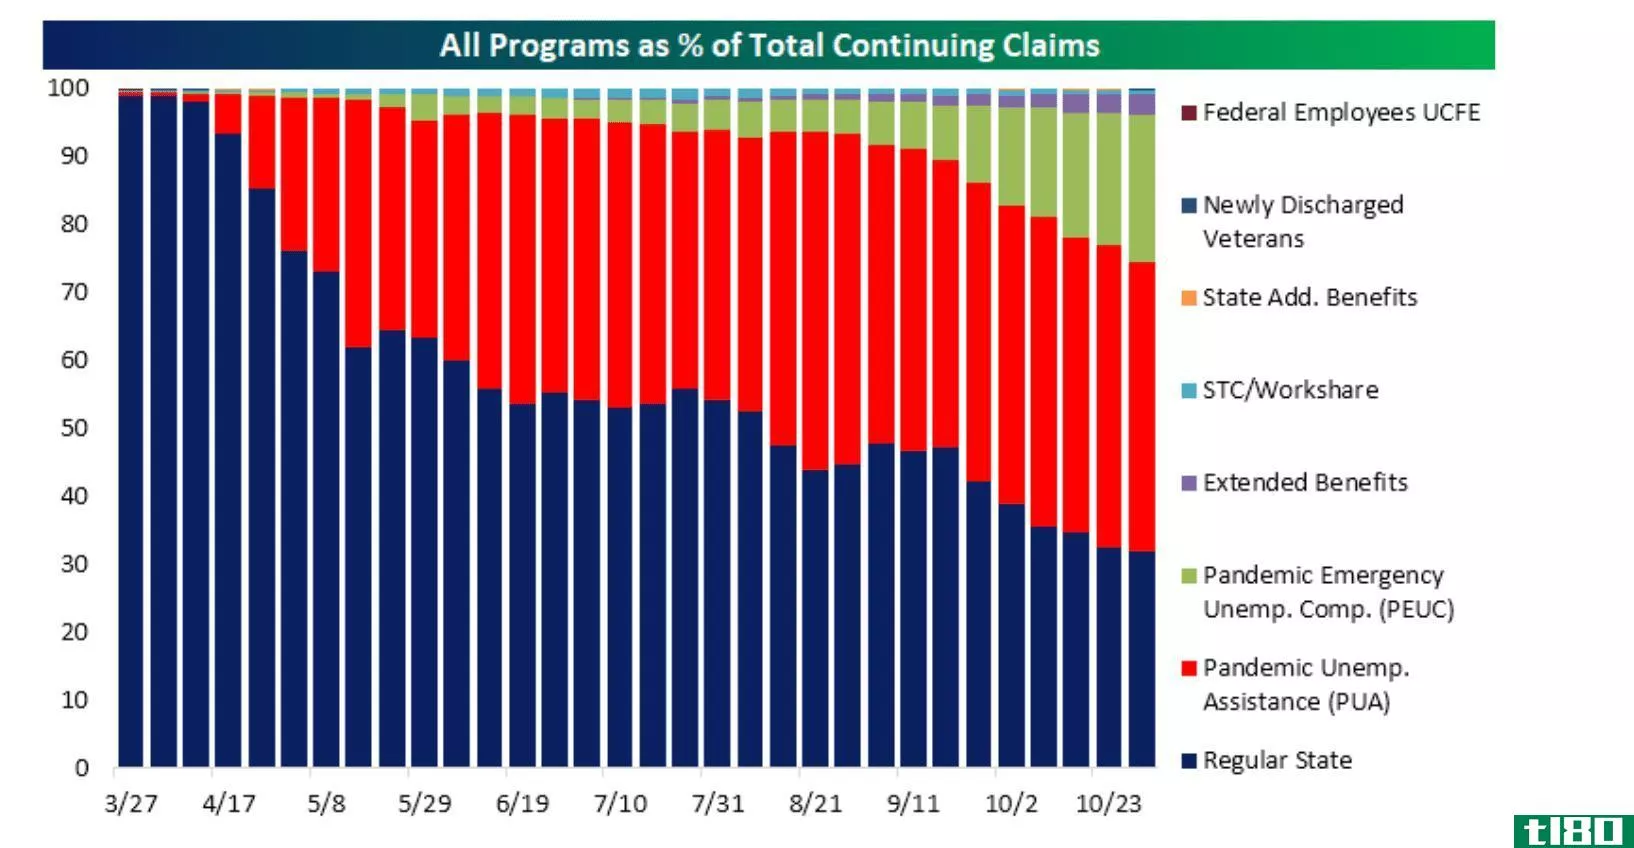 All programs as % of total continuing claims